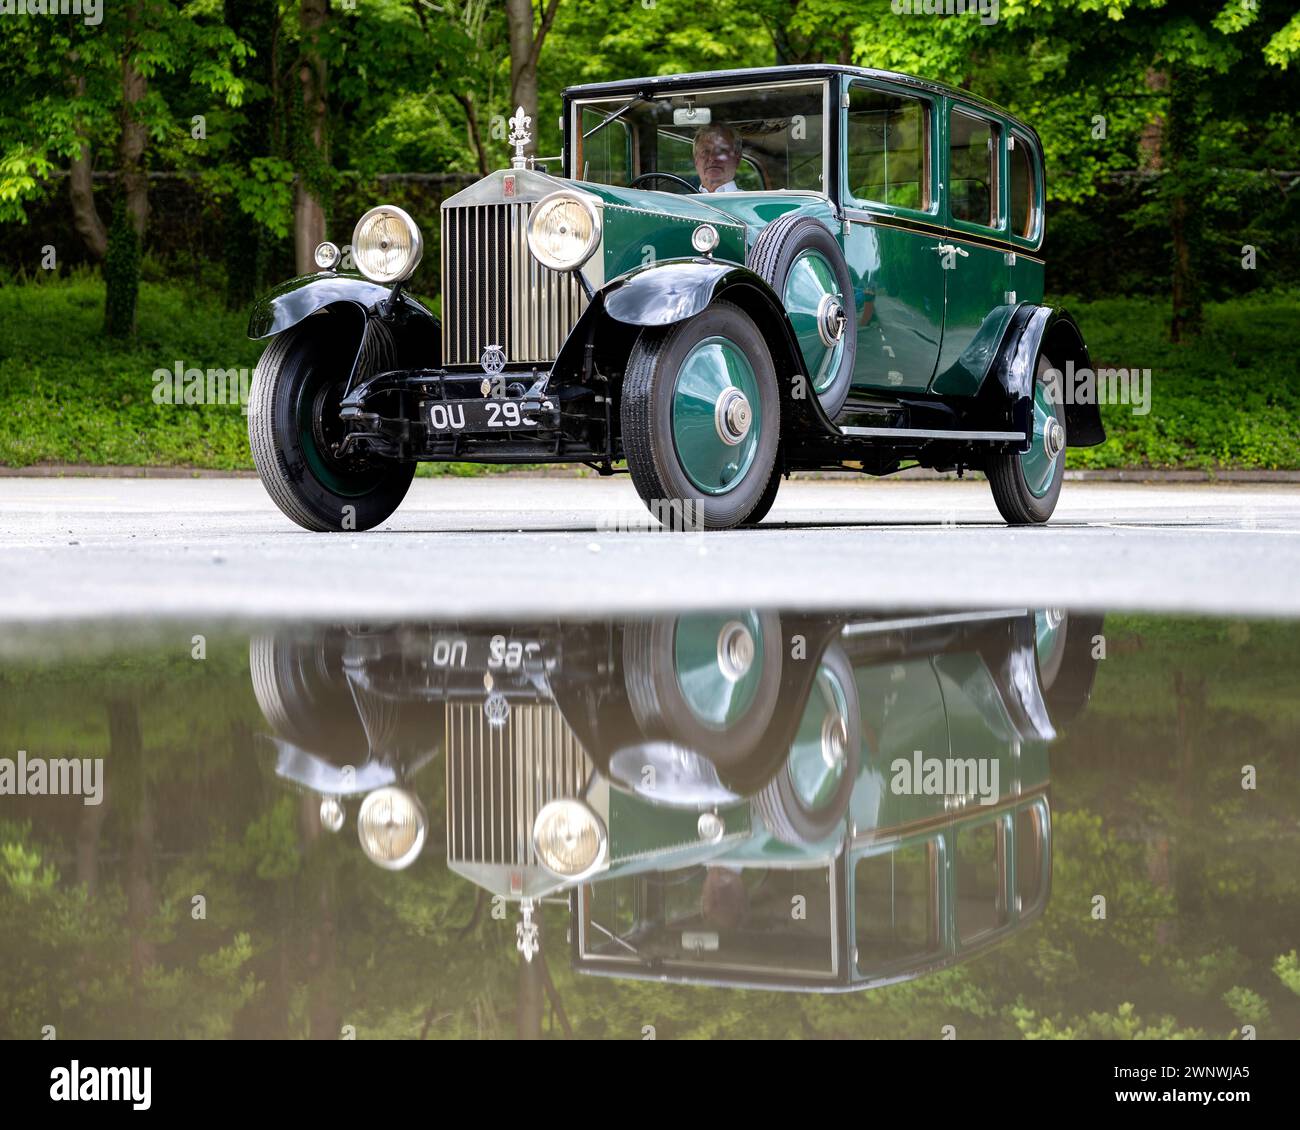 18/05/22   Great British Car Journey’s CEO Richard Usher The Rolls-Royce owned by Lord Baden-Powell, is now on permanent public display for the first Stock Photo